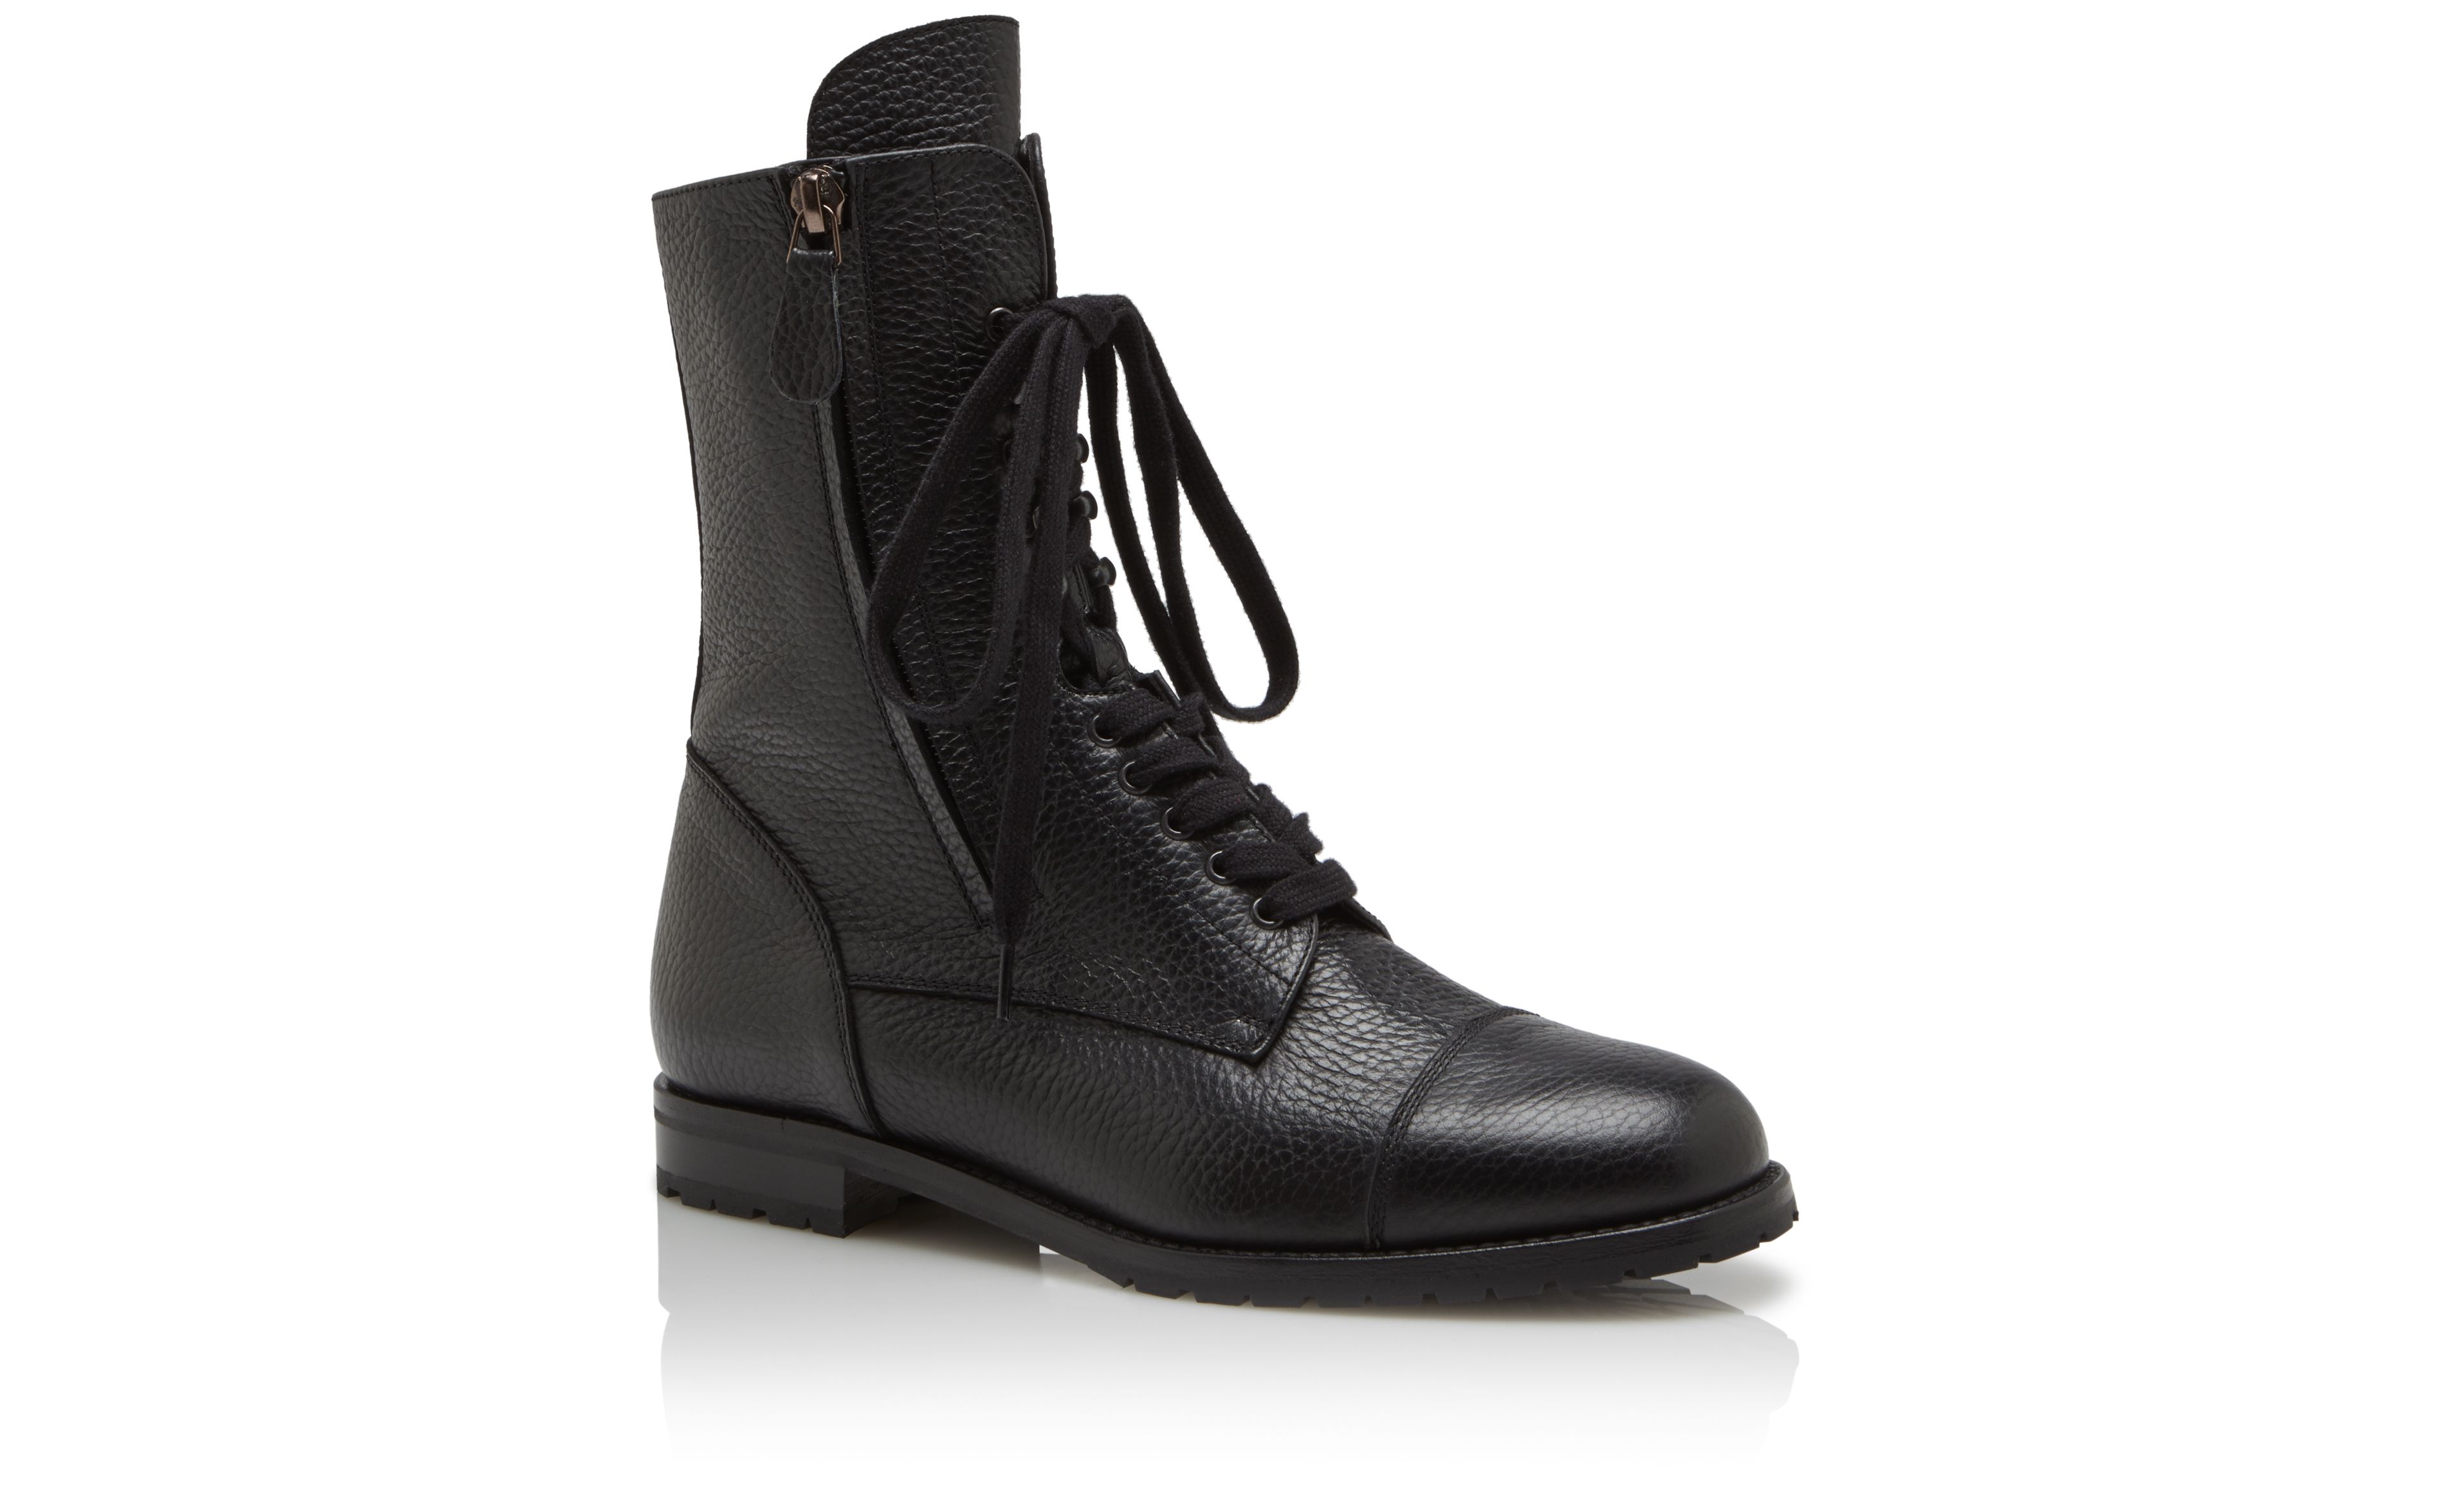 Designer Black Calf Leather Military Boots - Image Upsell